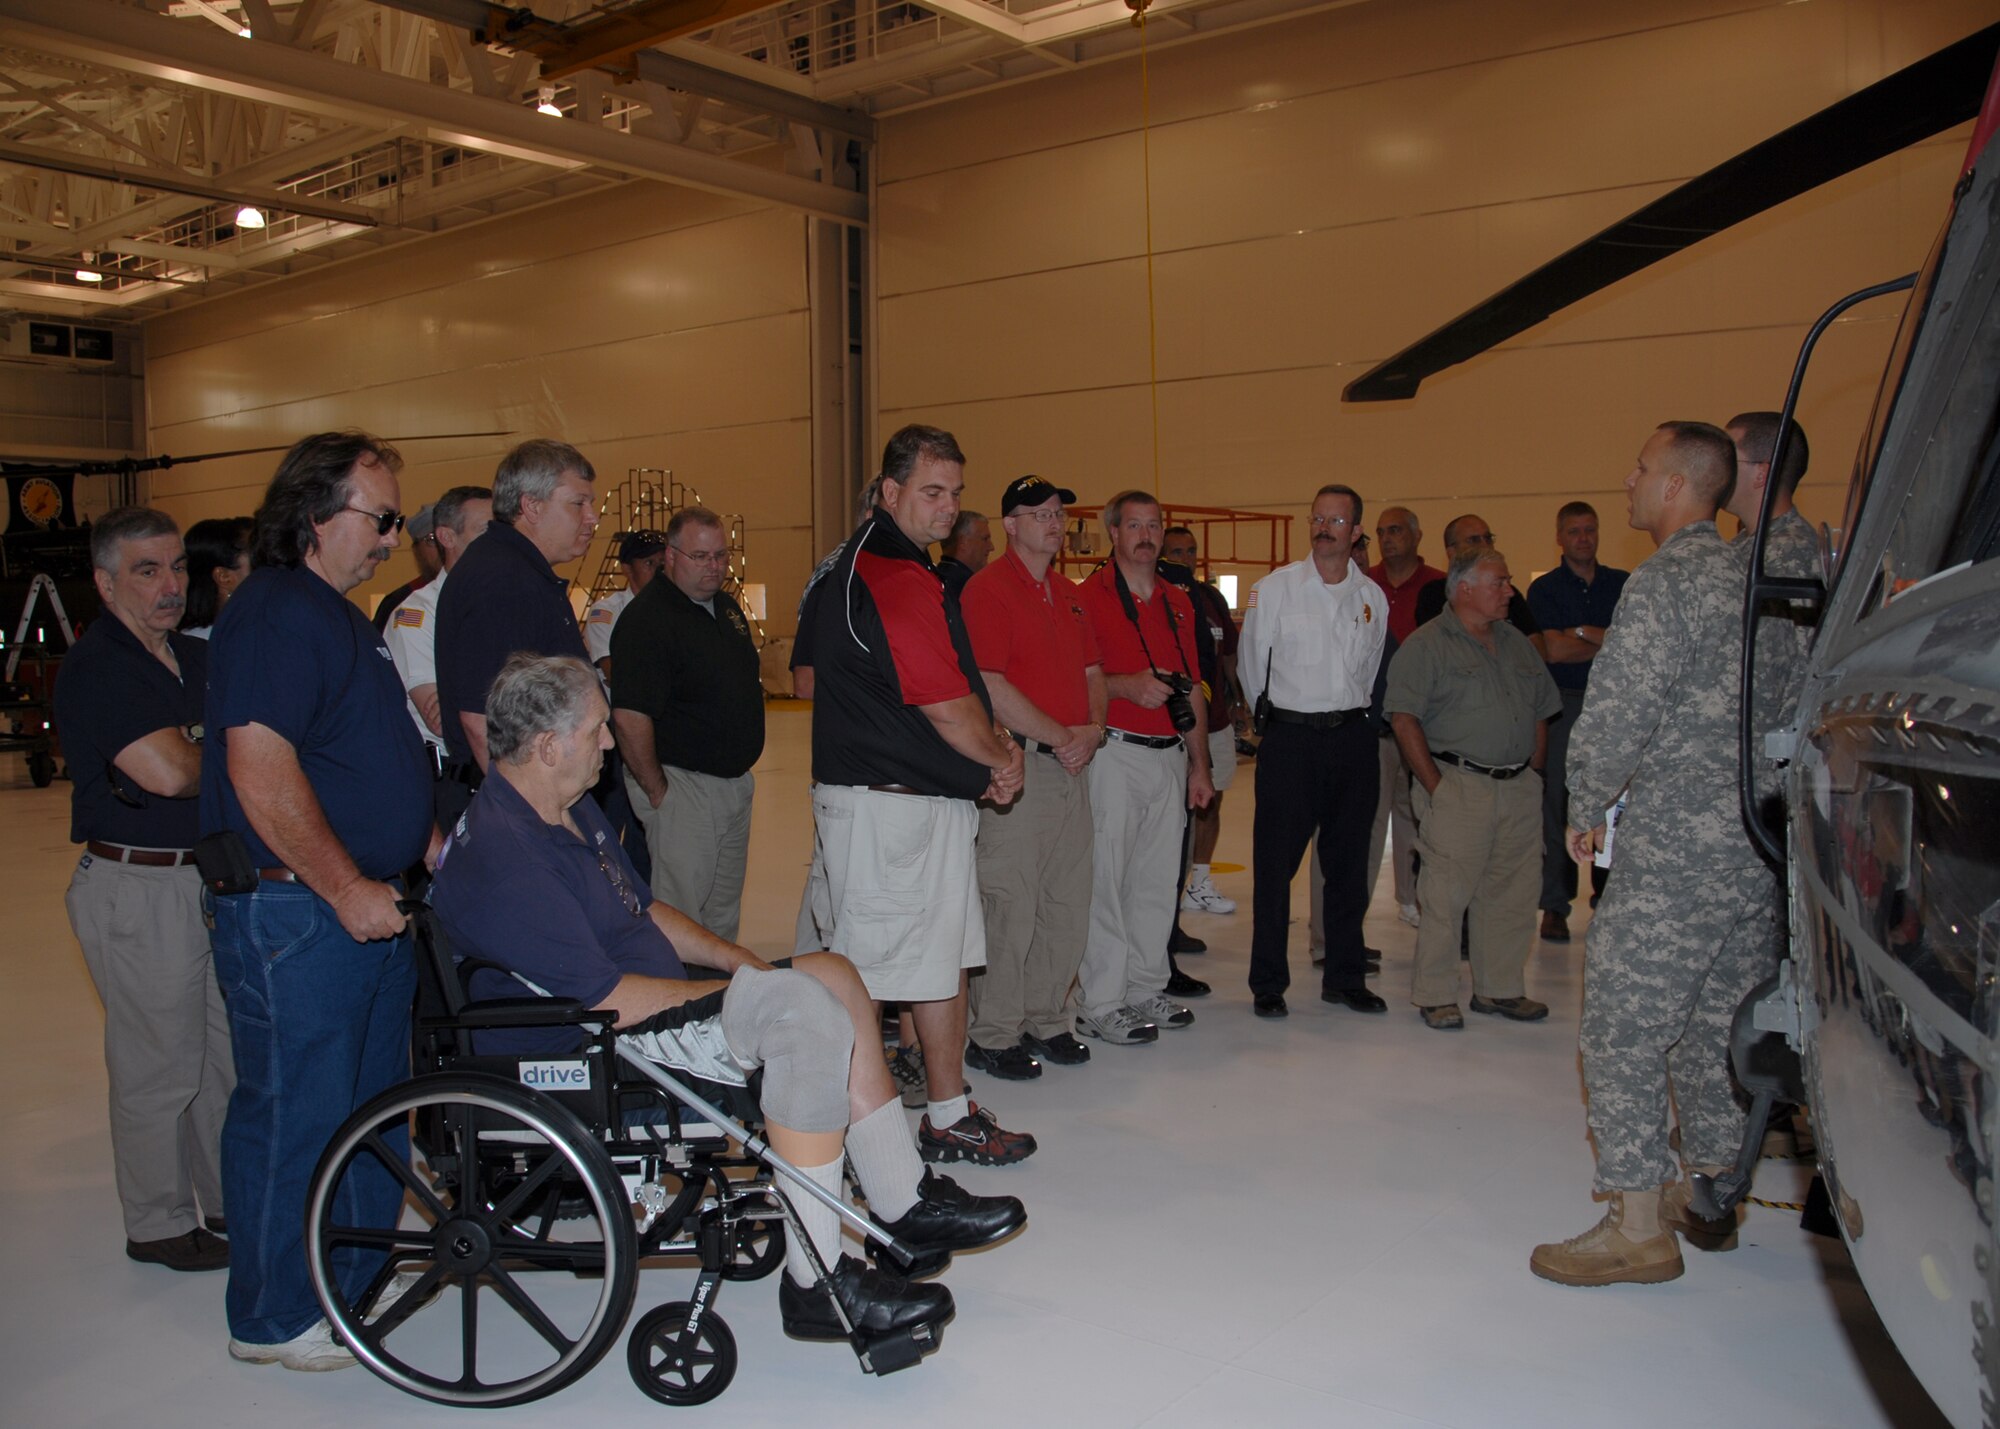 Friday, August 22nd, 50 employers of Guard or Reserve members came to Barnes Air National Guard Base in Westfield to learn first-hand what we do, and why their support is so crucial. 